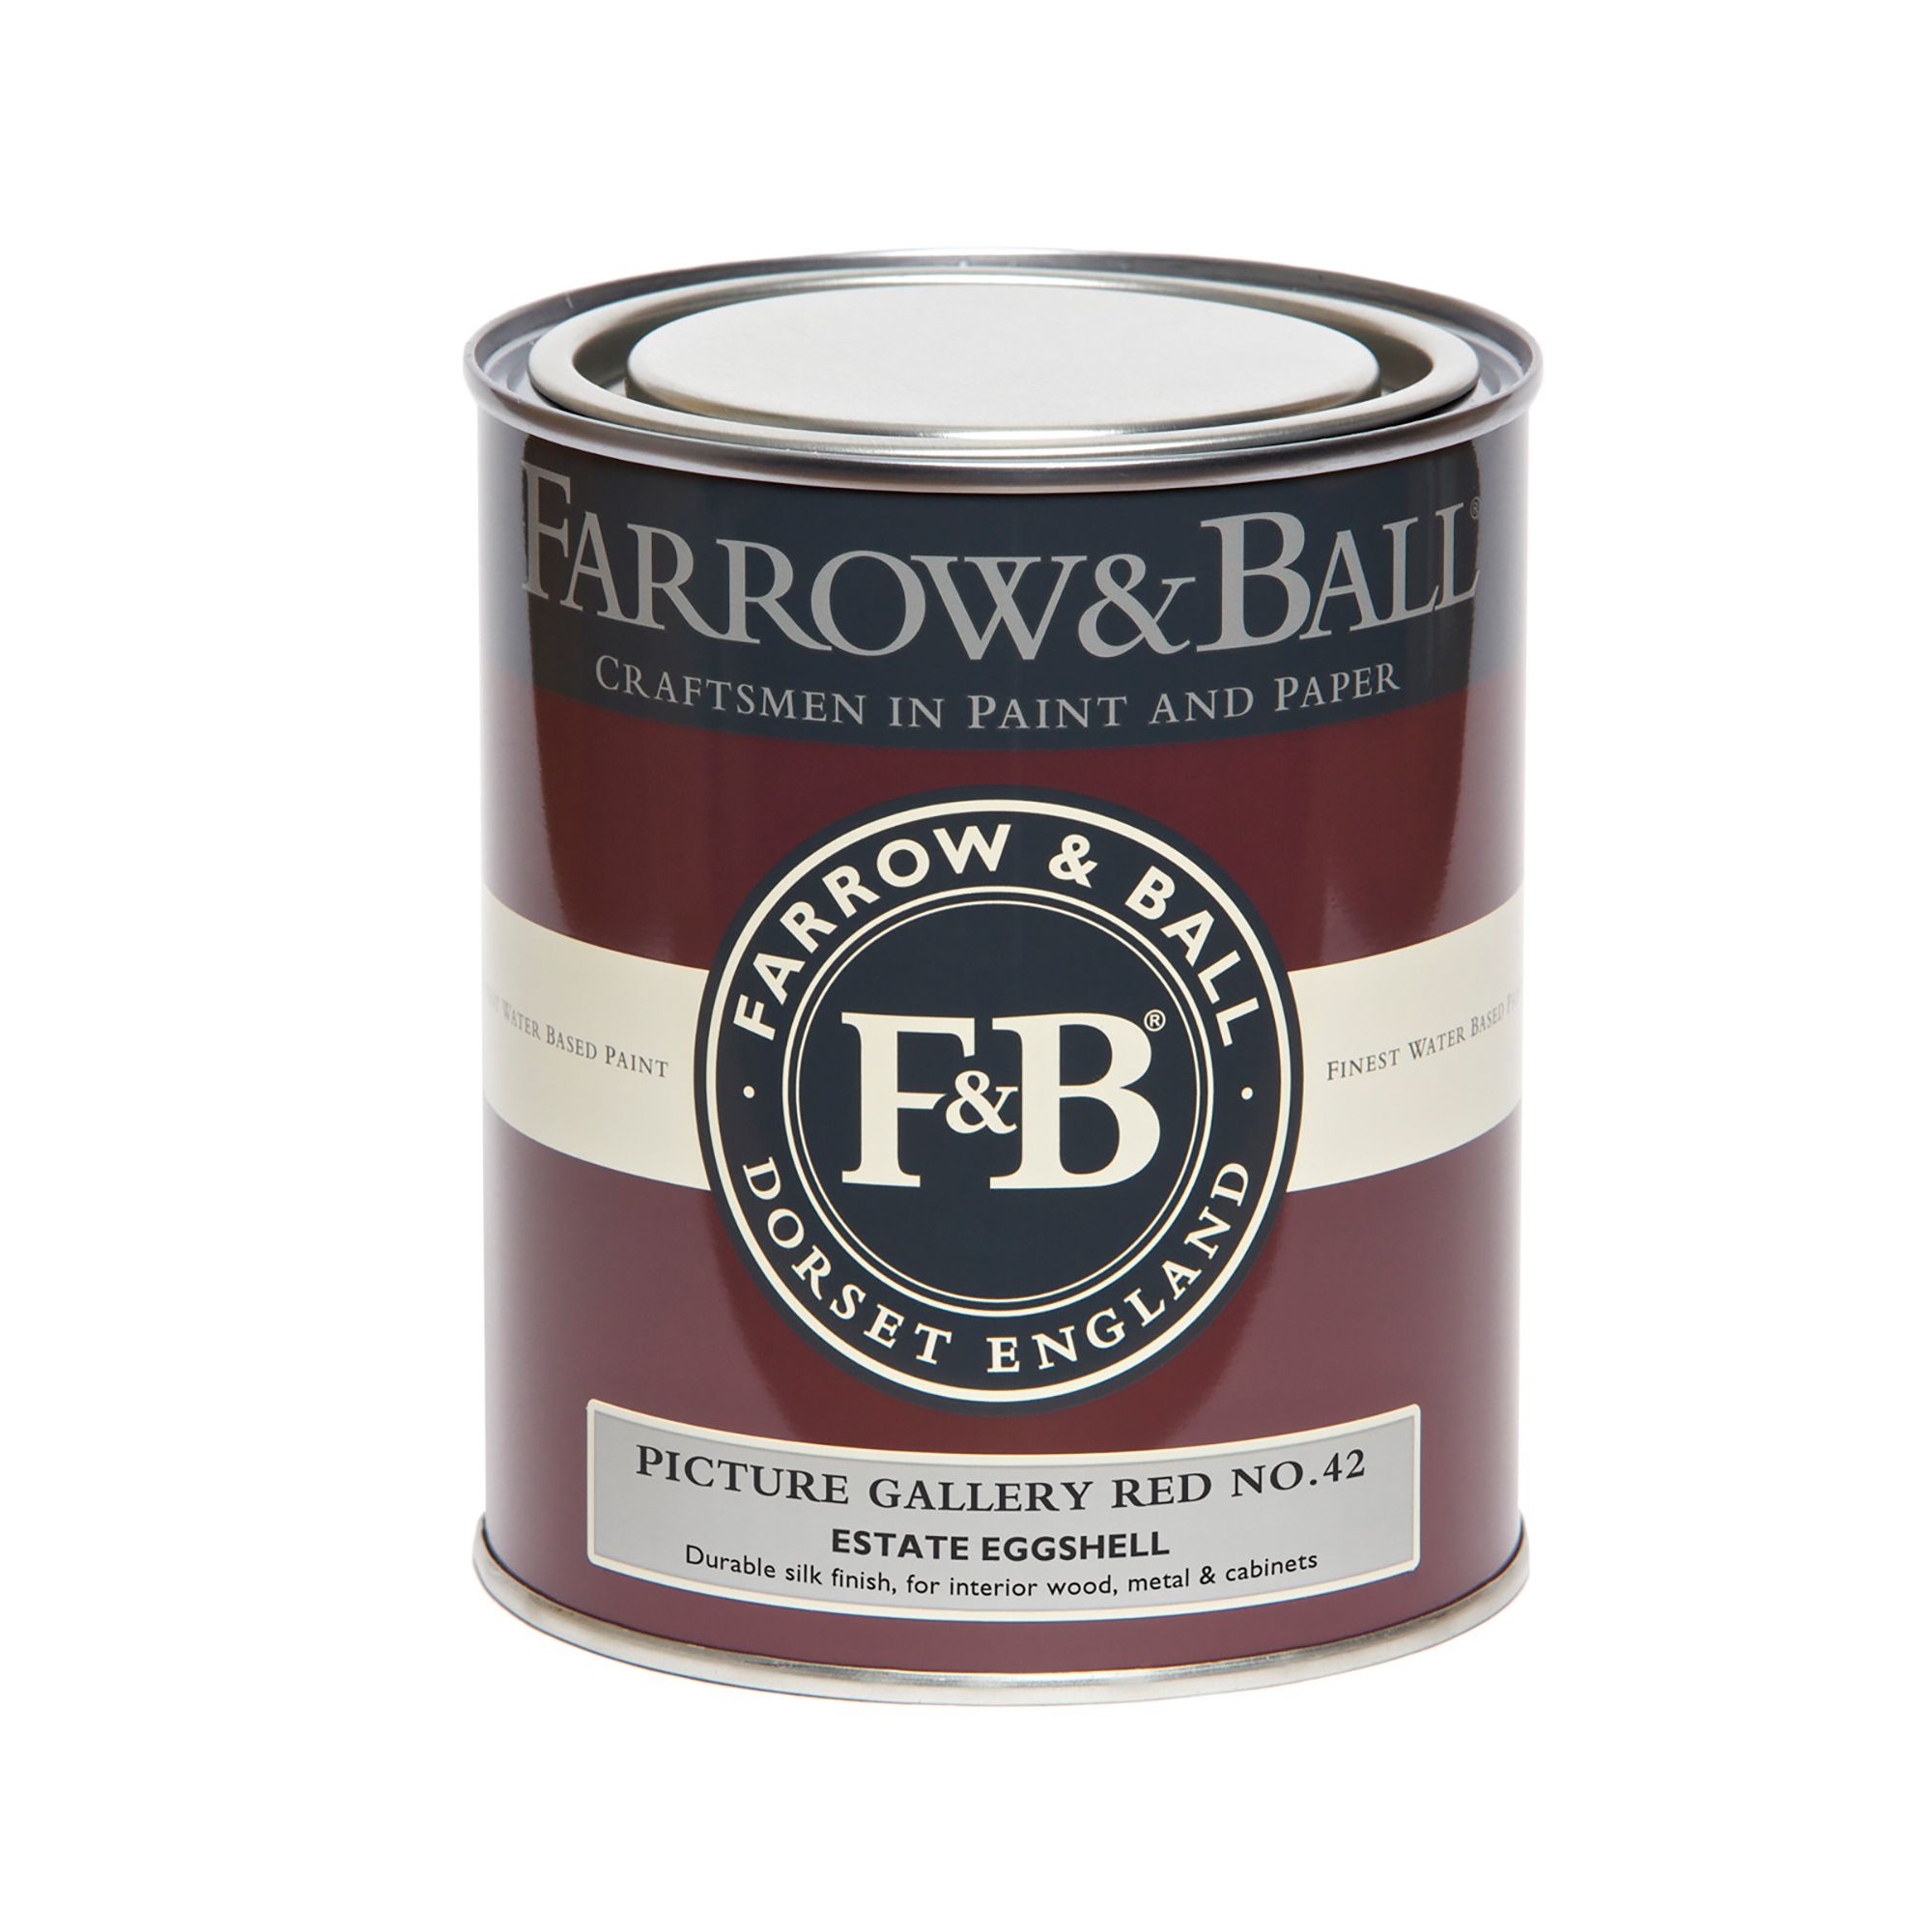 Farrow & Ball Estate Picture Gallery Red No.42 Eggshell Paint, 750ml